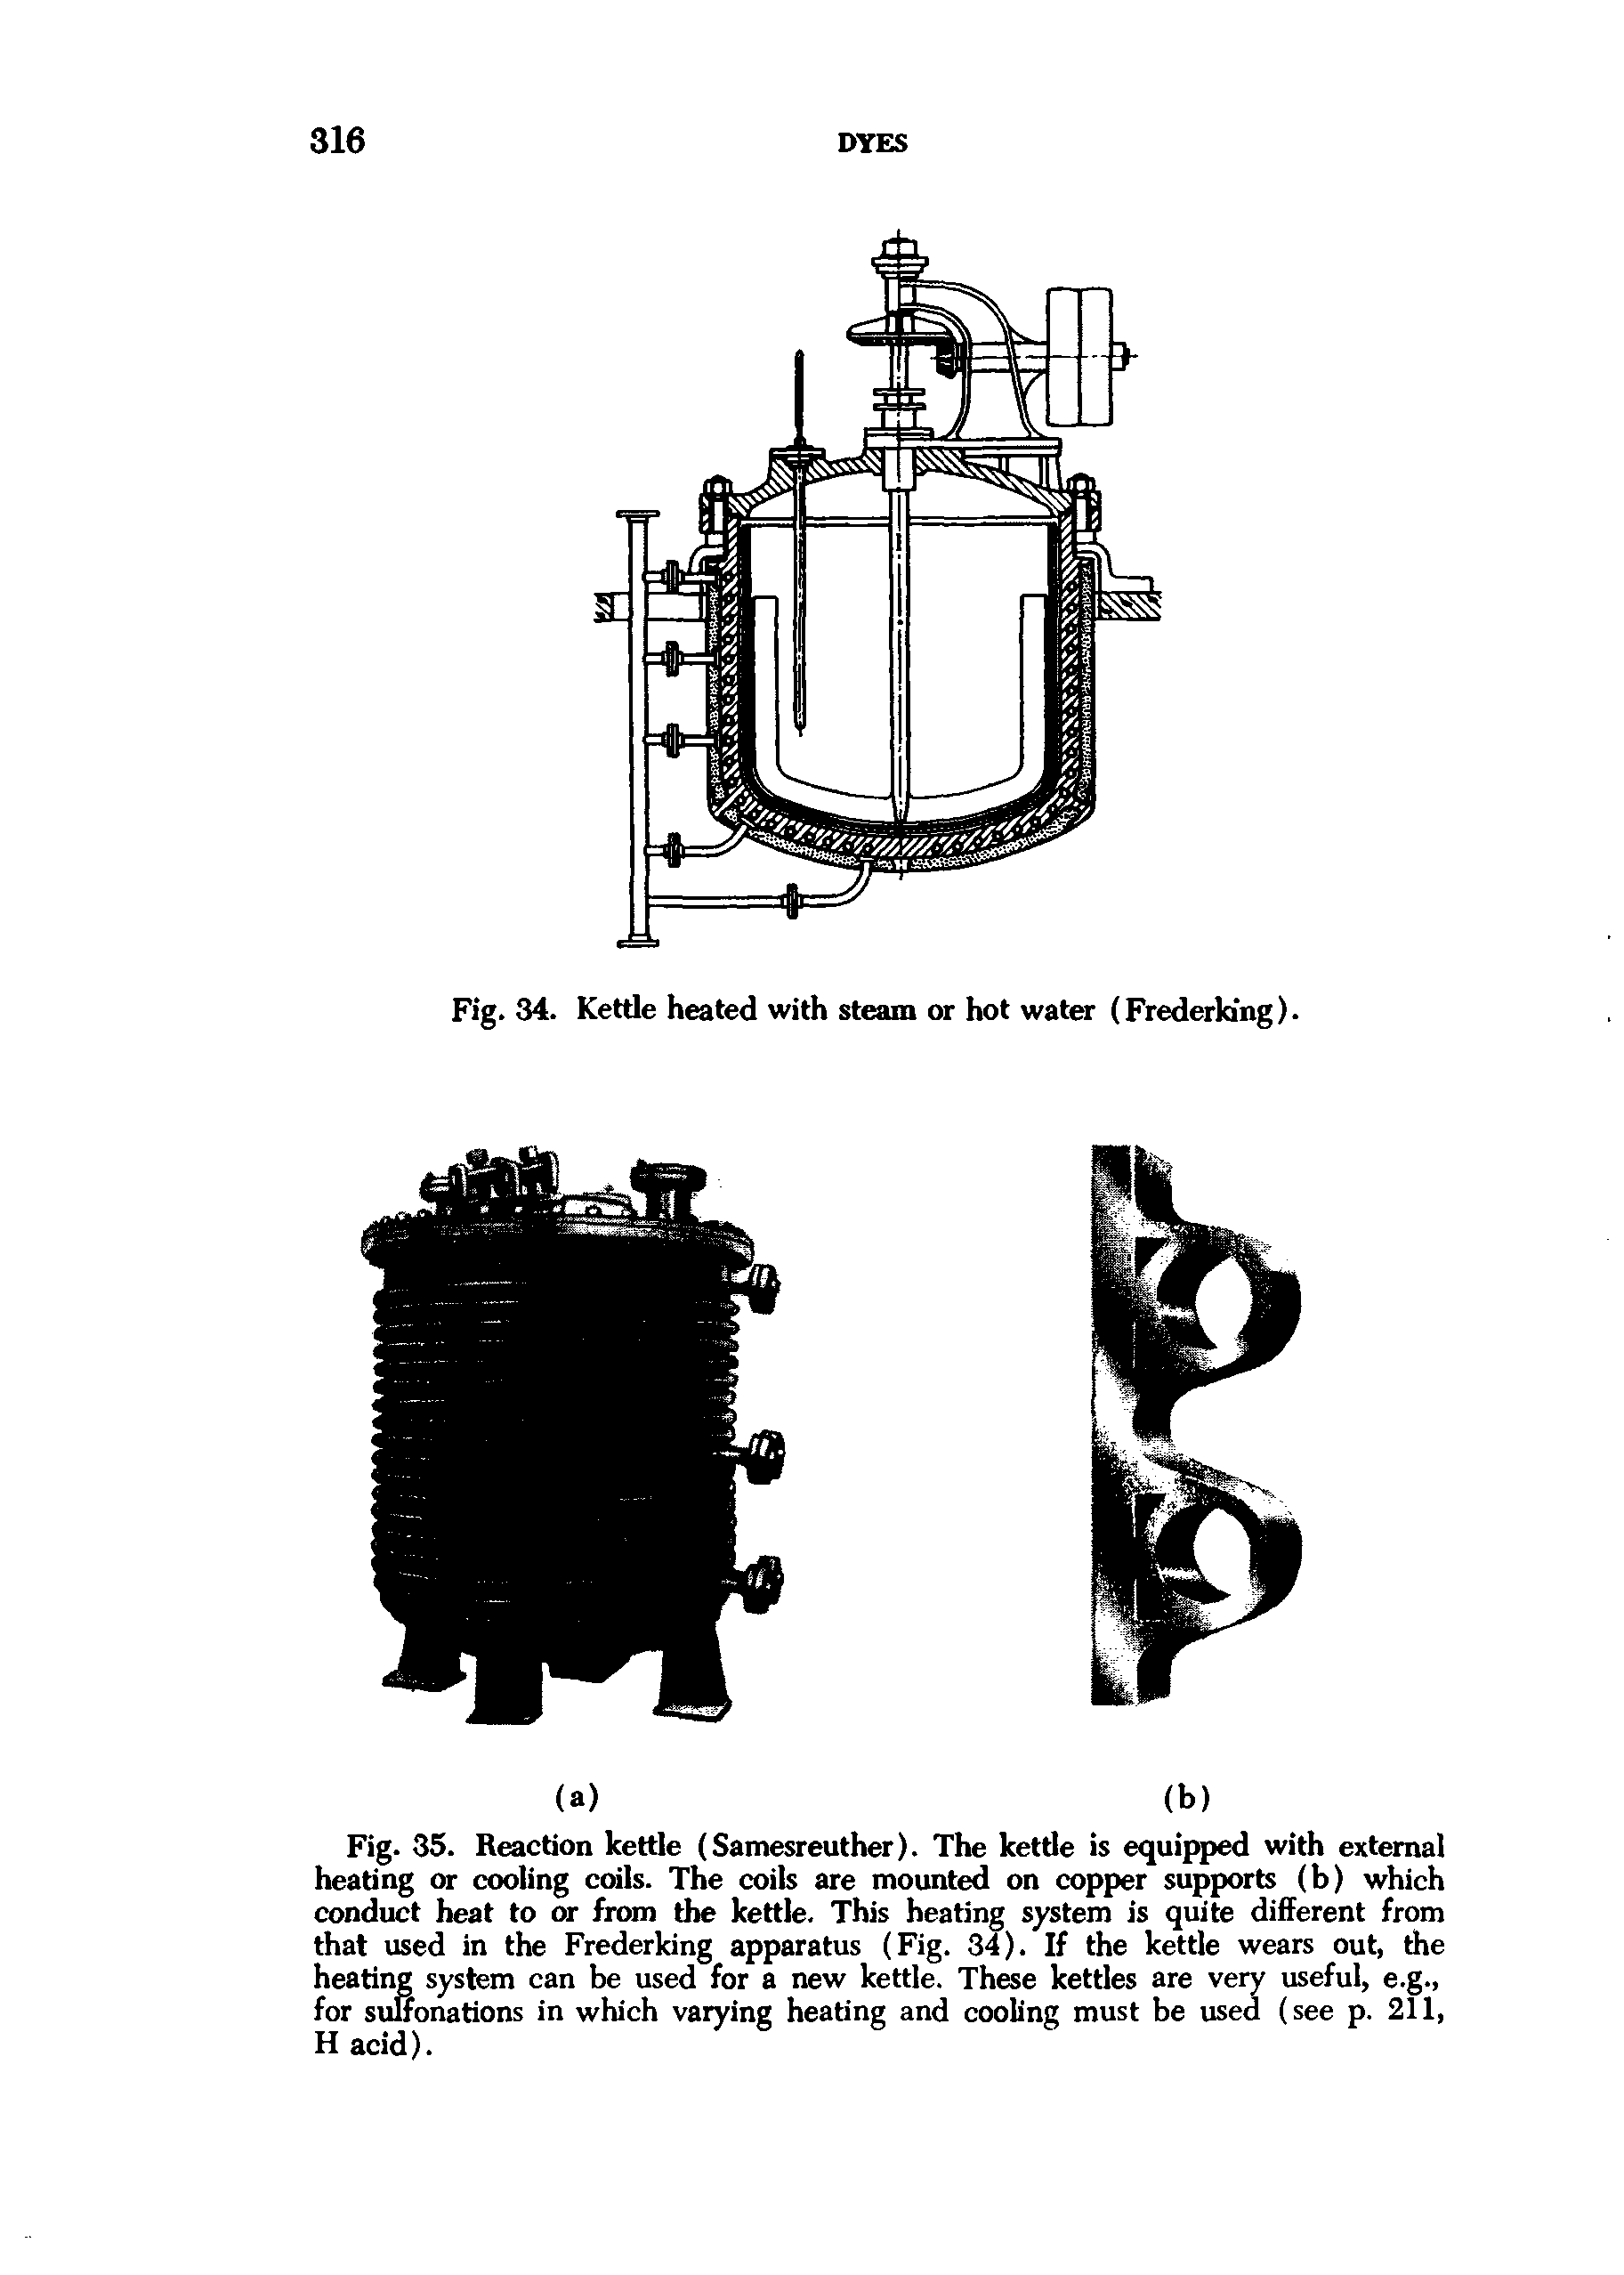 Fig. 35. Reaction kettle (Samesreuther). The kettle is equipped with external heating or cooling coils. The coils are mounted on copper supports (b) which conduct heat to or from the kettle. This heating system is quite different from that used in the Frederking apparatus (Fig. 34). If the kettle wears out, the heating system can be used for a new kettle. These kettles are very useful, e.g., for suffonations in which varying heating and cooling must be used (see p. 211, H acid).